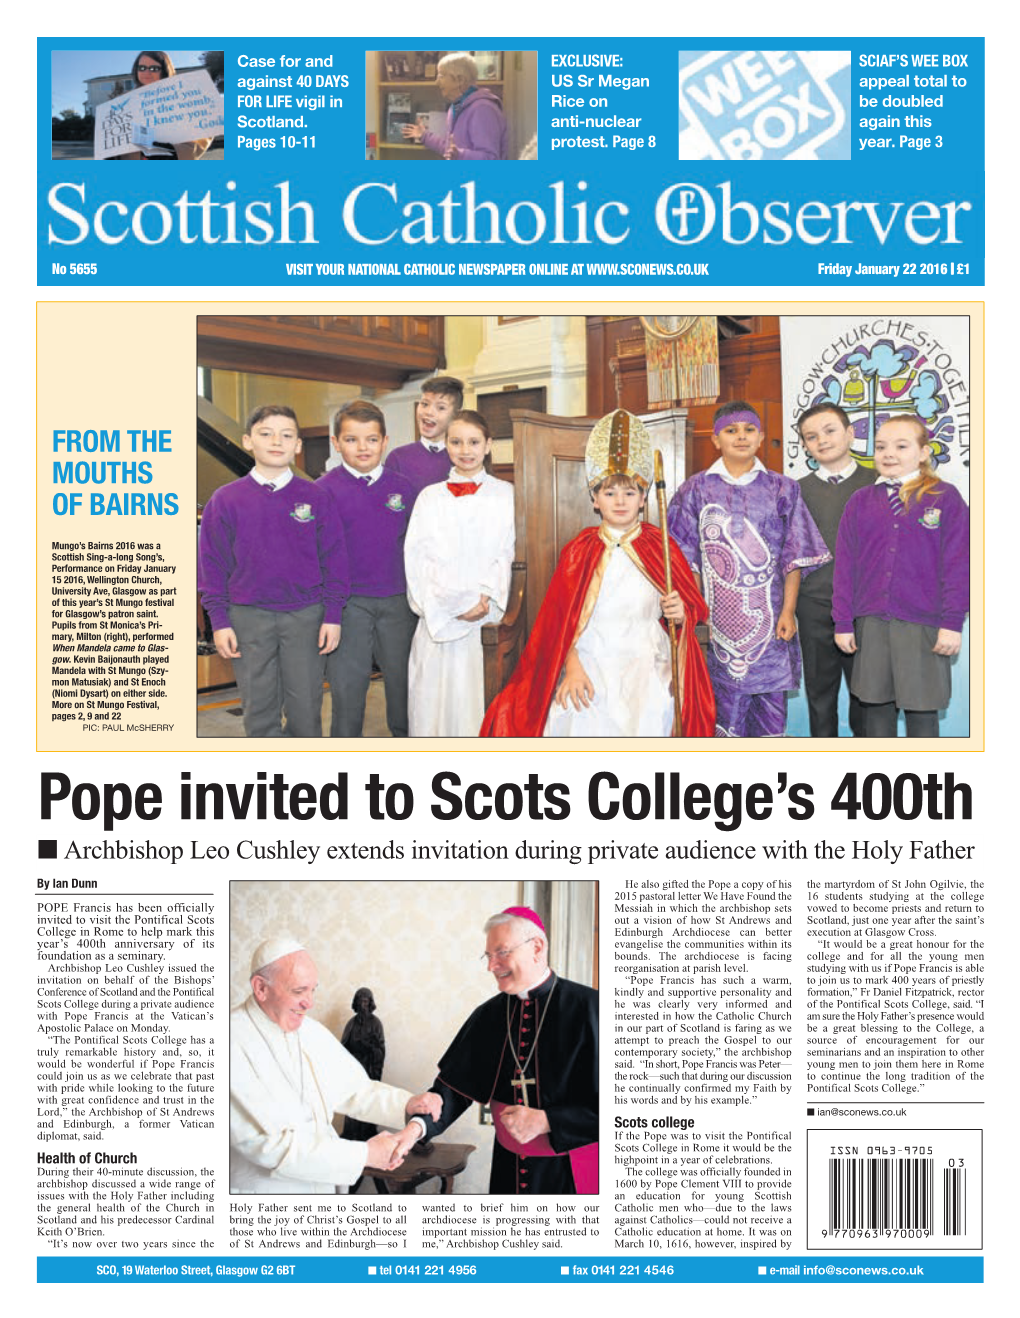 Pope Invited to Scots College's 400Th